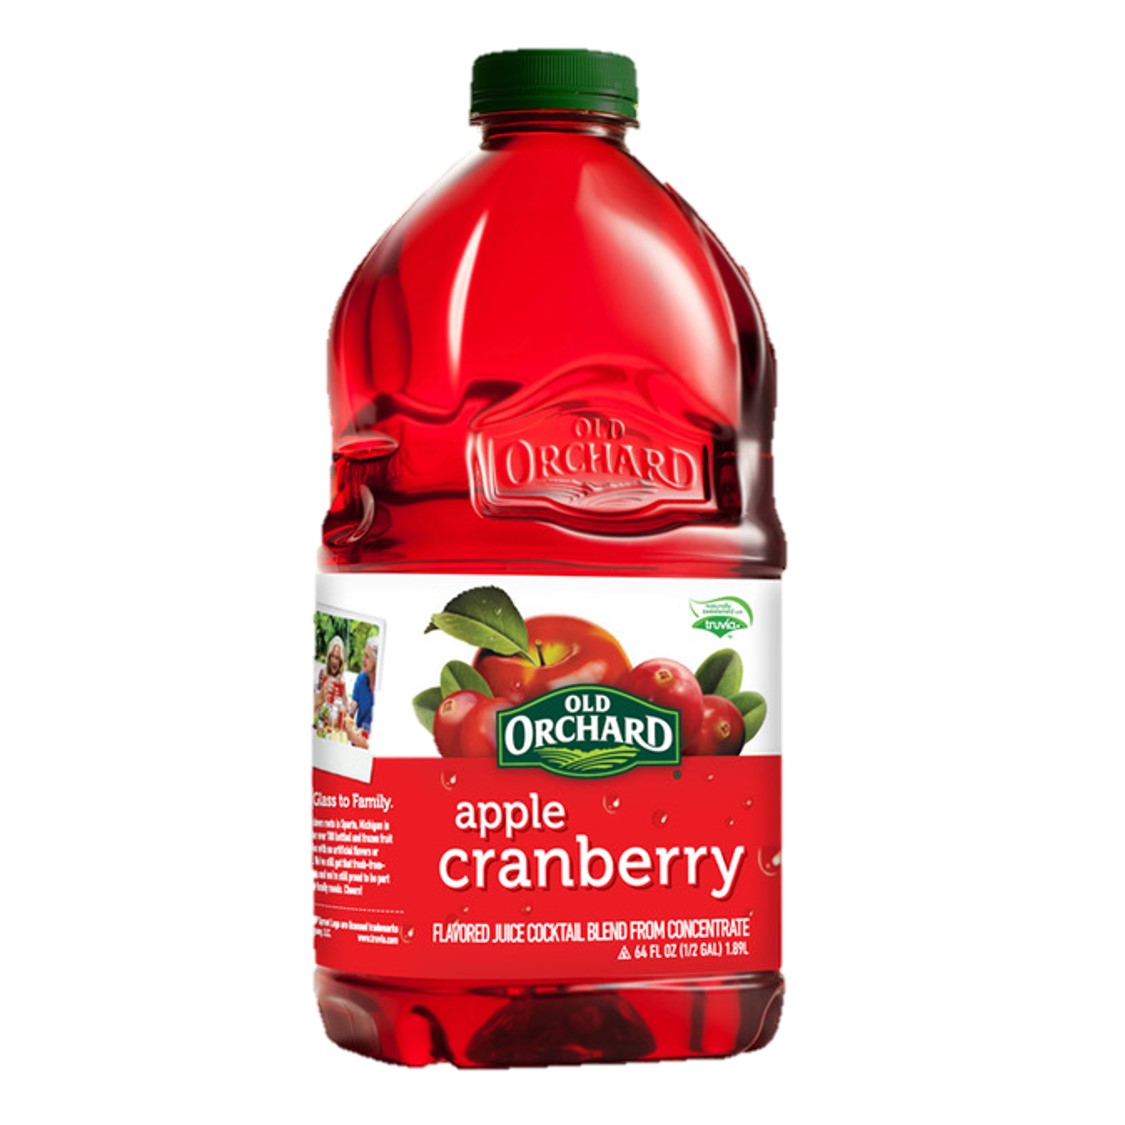 Aceclusive Buy 1 Take 1 Old Orchard Apple Cranberry Juice 64oz.